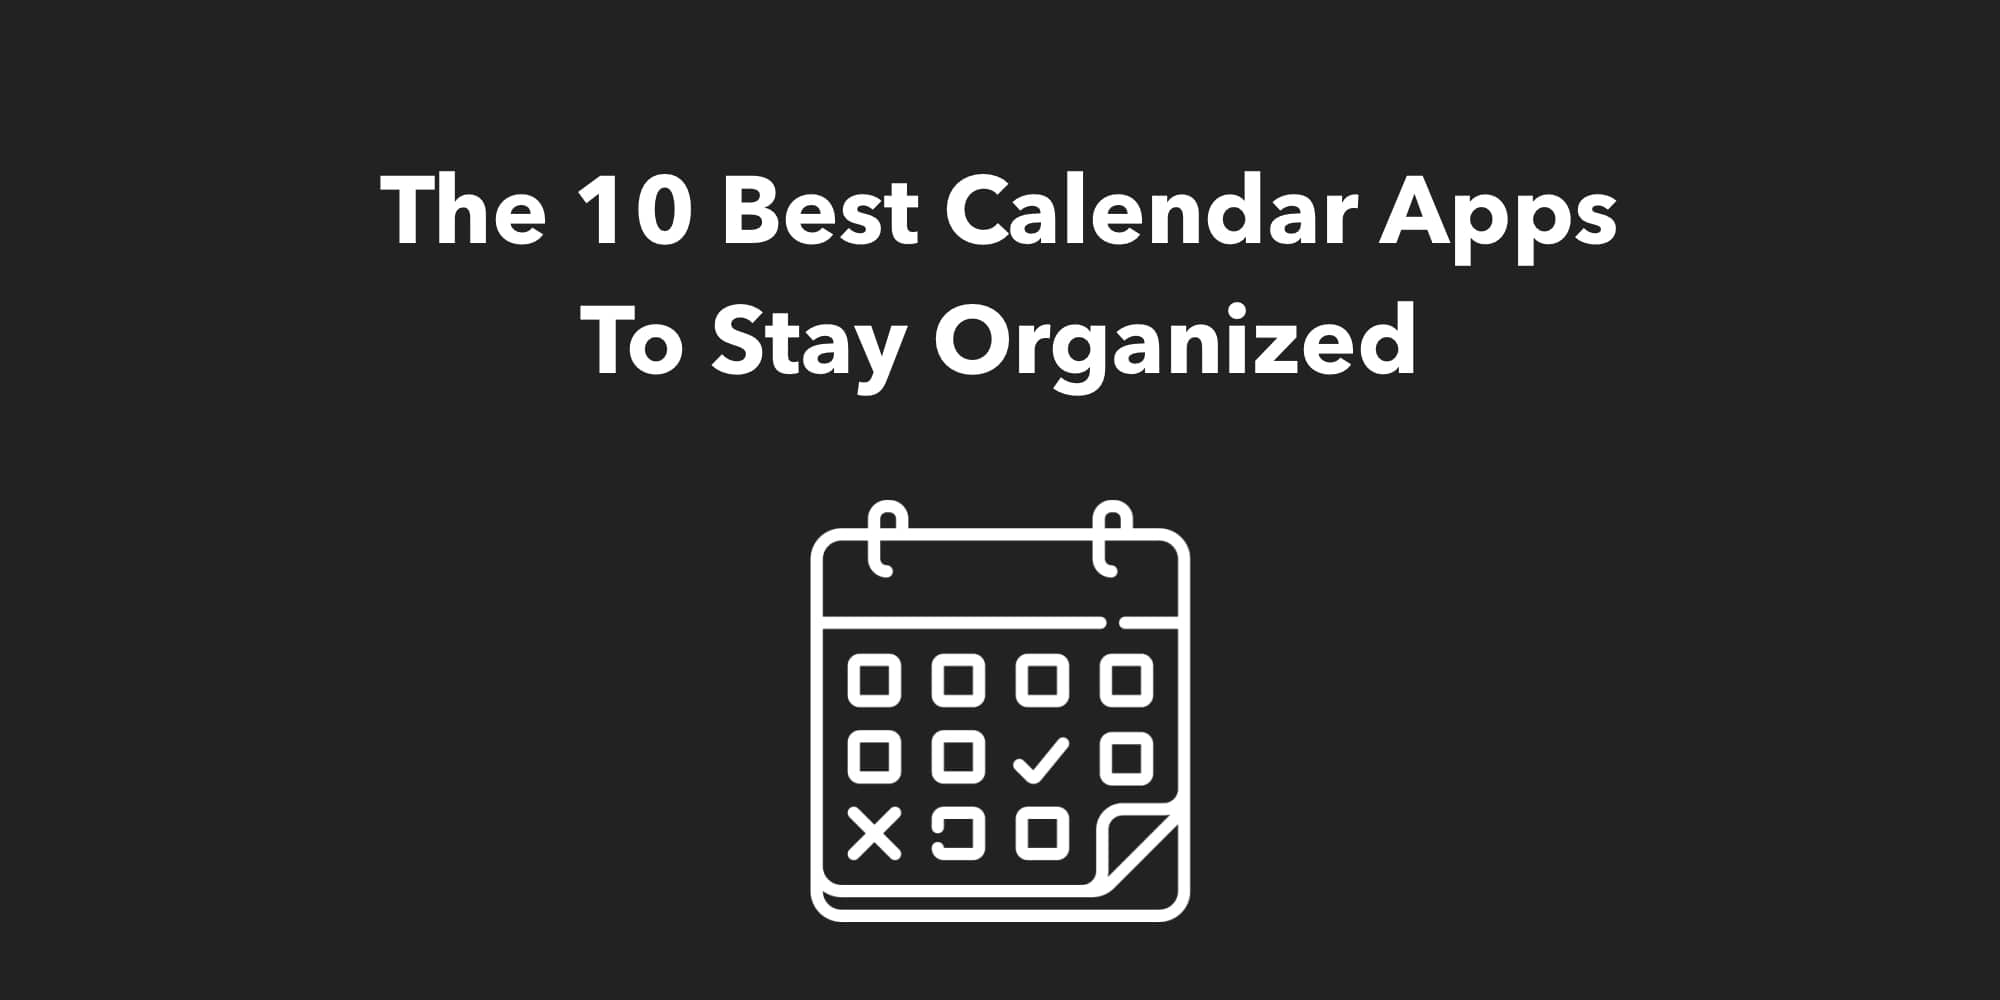 The 10 Best Calendar Apps To Stay Organized